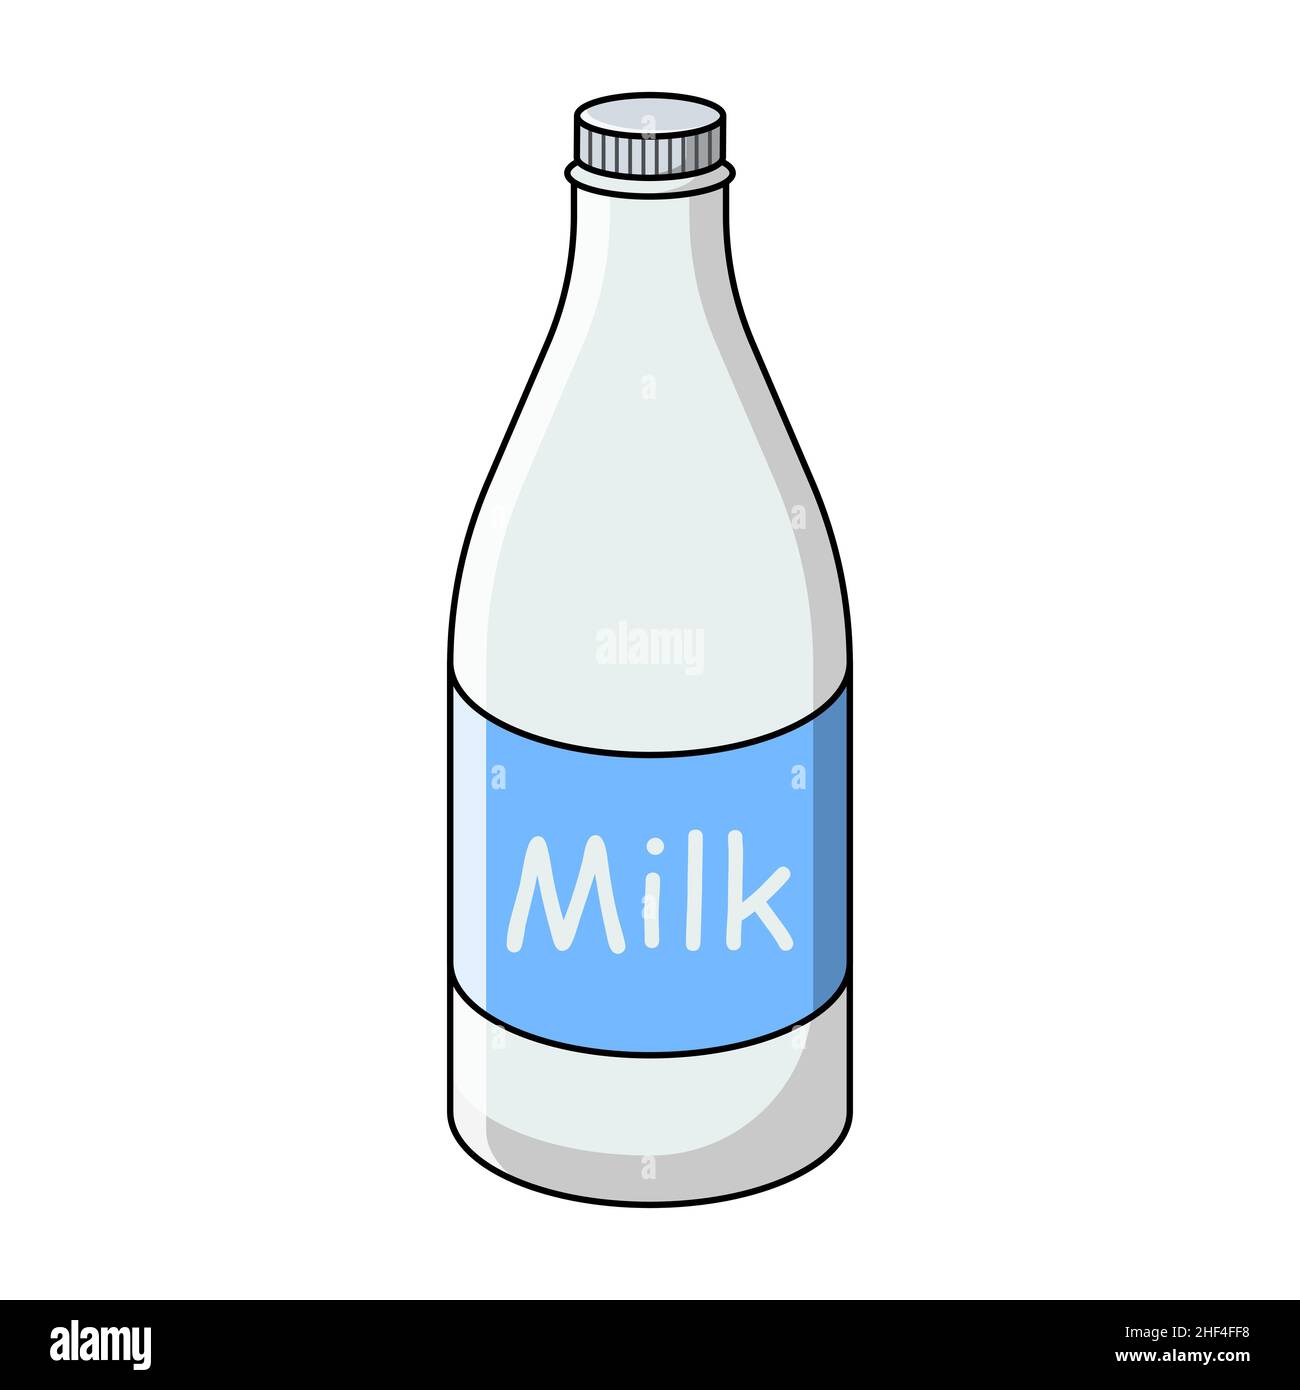 Milk bottle with blue label. Isolated vector icon illustration on white background. Flat line cartoon style. Stock Vector